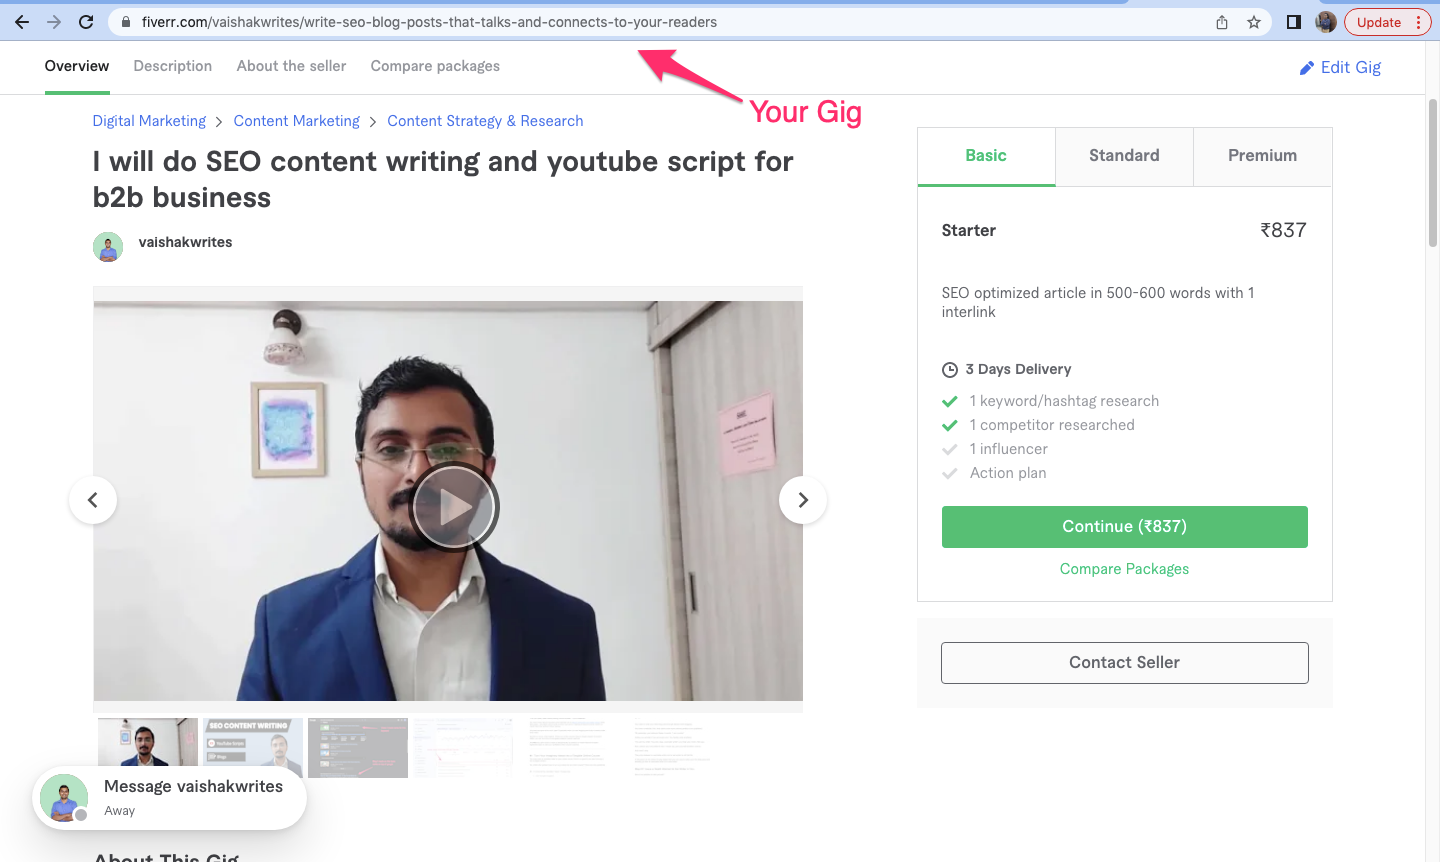 how to create a gig on fiverr